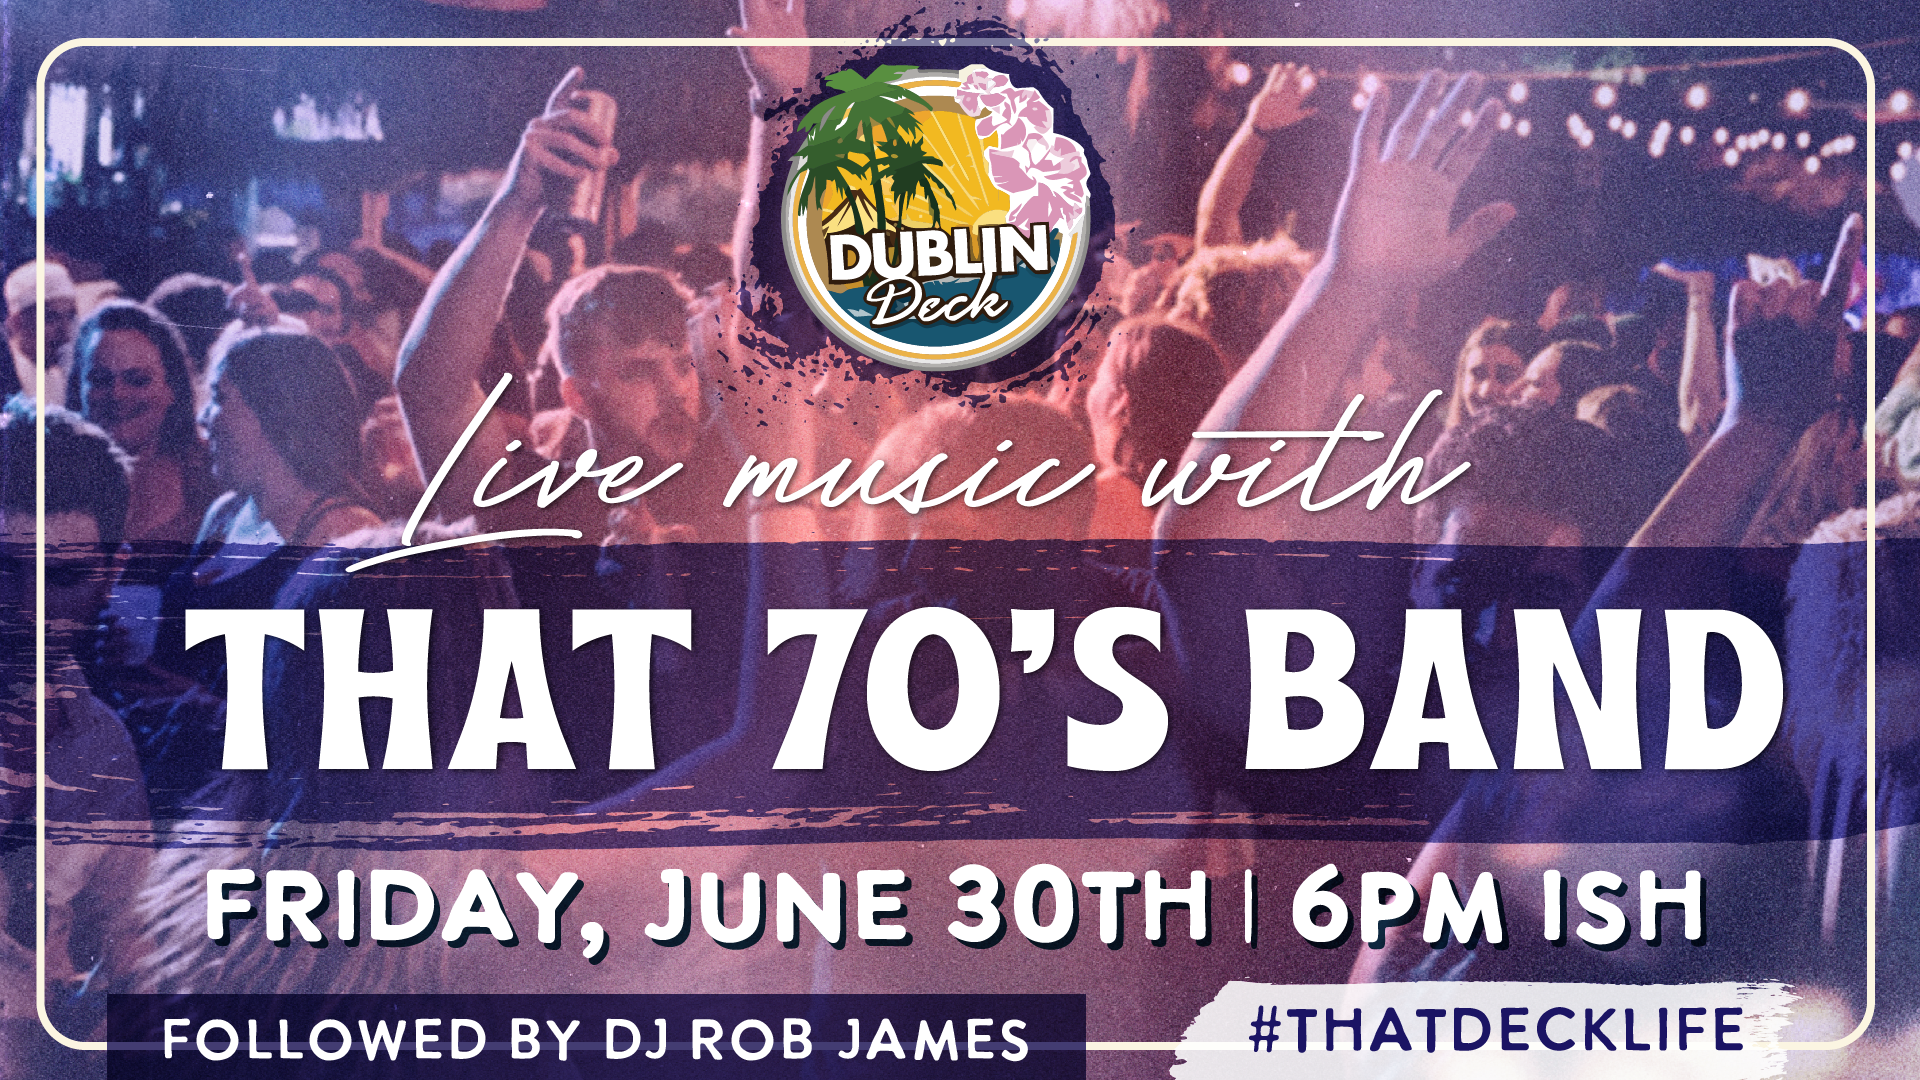 We're getting Friday night started with That 70's Band! Music begins at 6PM